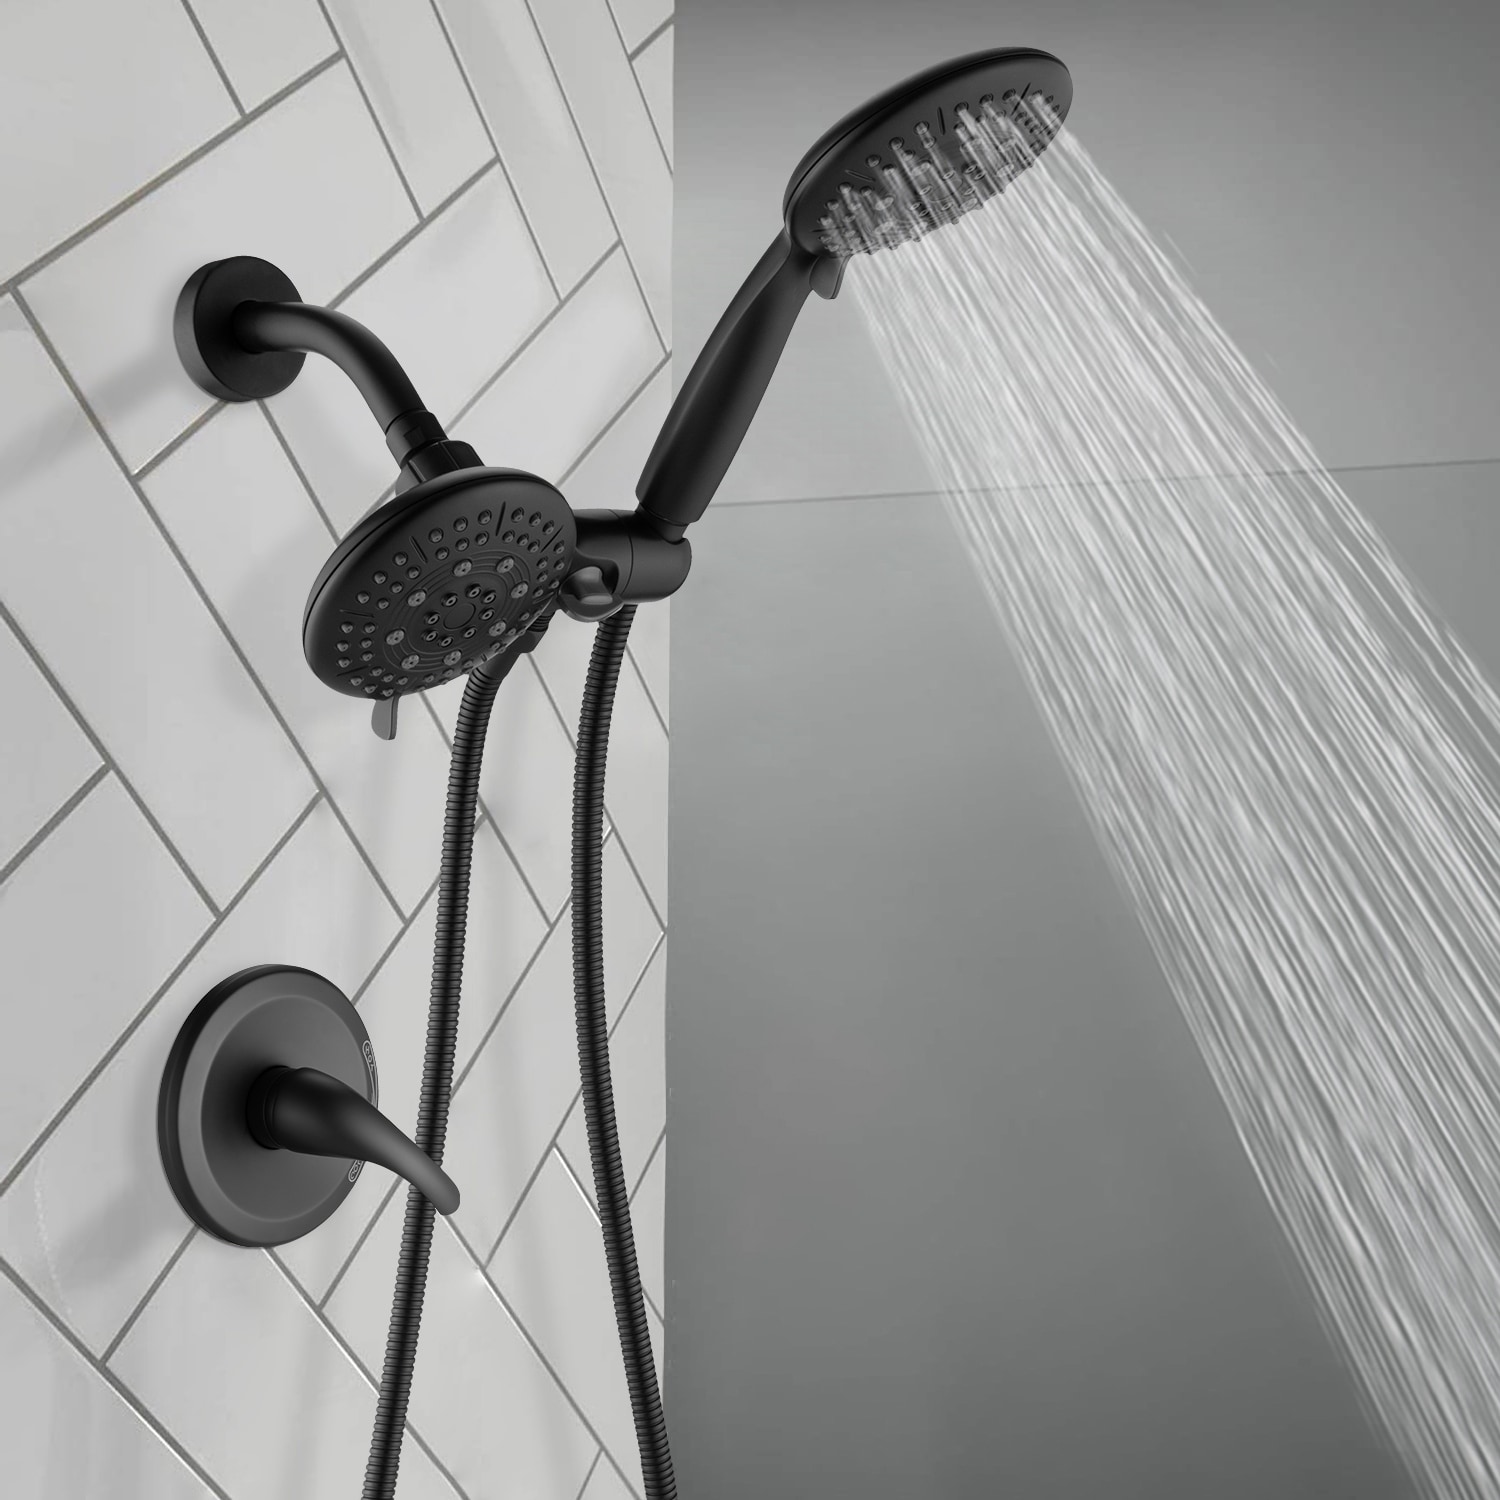 PROOX 5-Spray 8 in. Round Shower System Kit with Hand Shower and